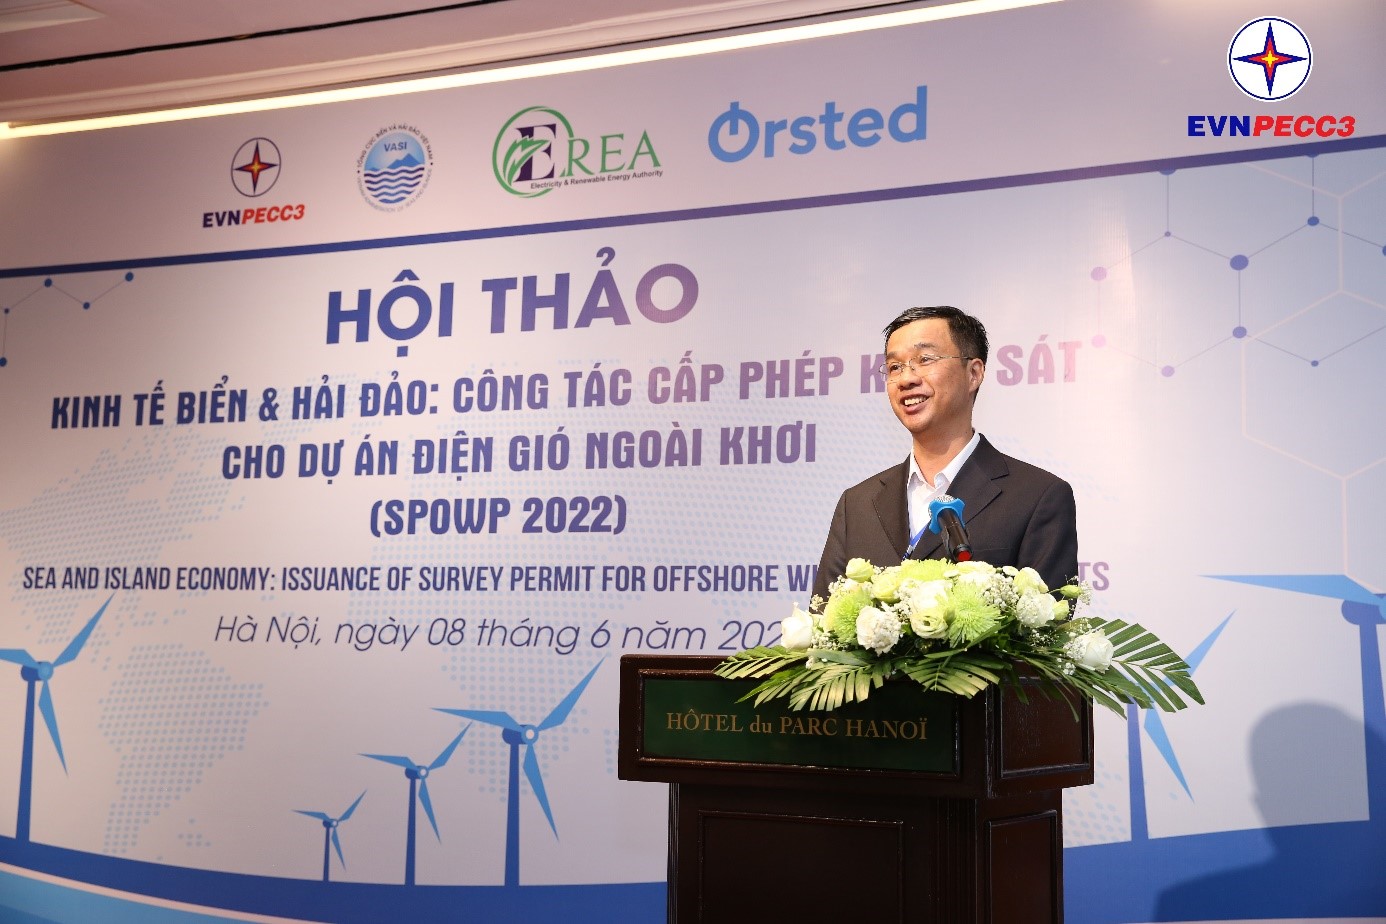 Mr. Tran Quoc Dien, Vice President of EVNPECC3 speaking at the opening of the Seminar